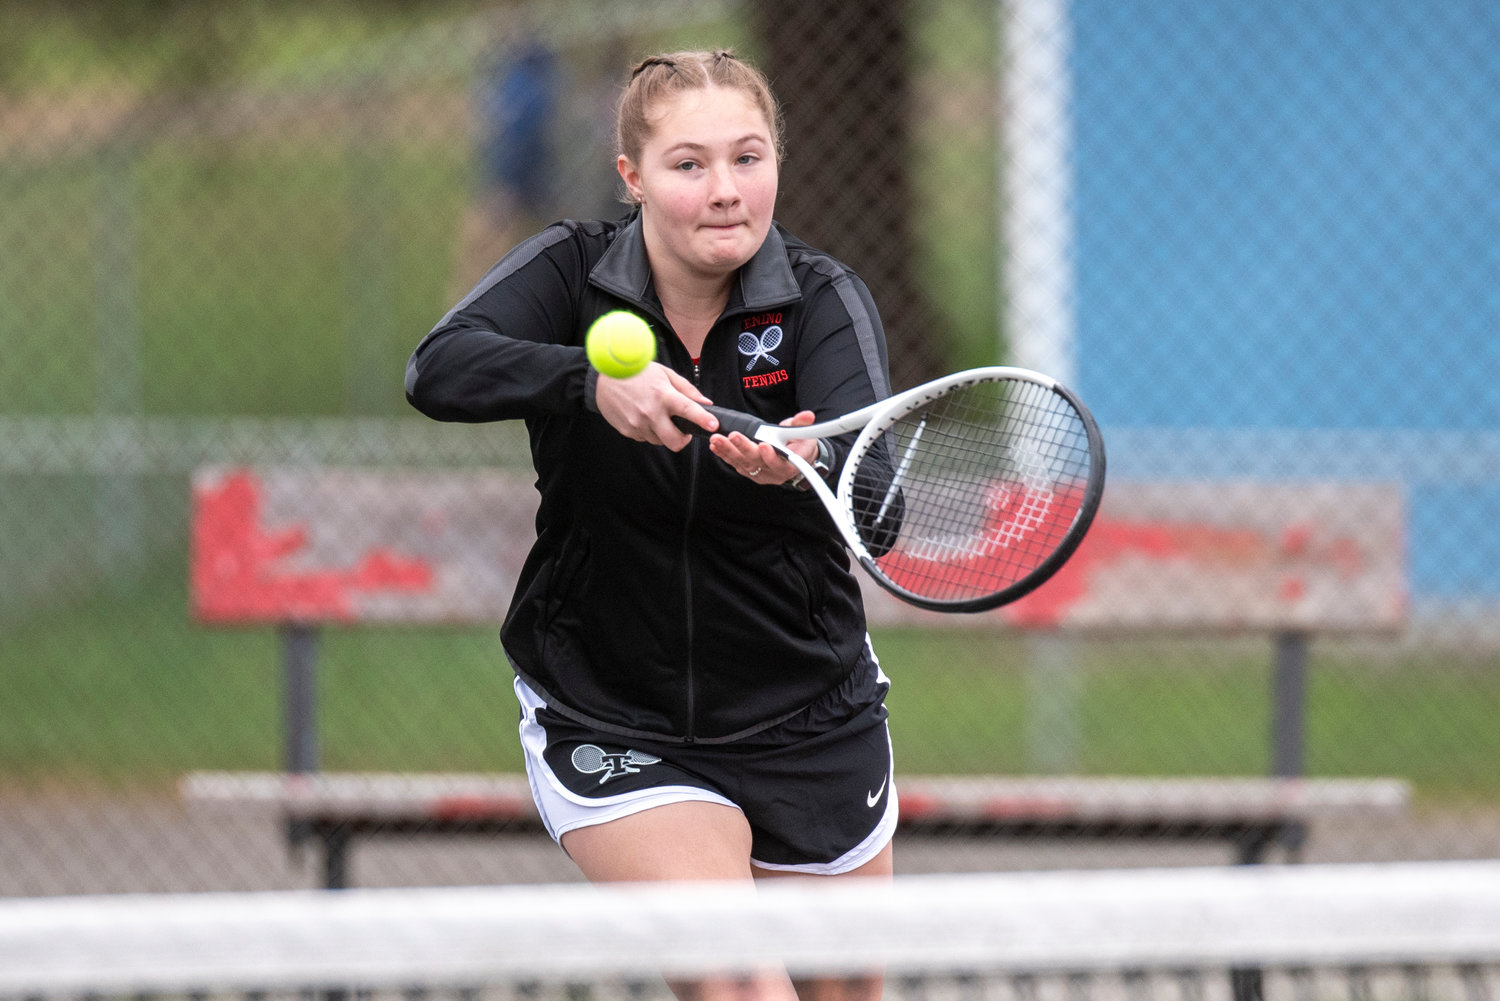 Tenino's Bailey McKitrick returns a hit from an Eatonville player during a No. 2 singles match at home on March 29.